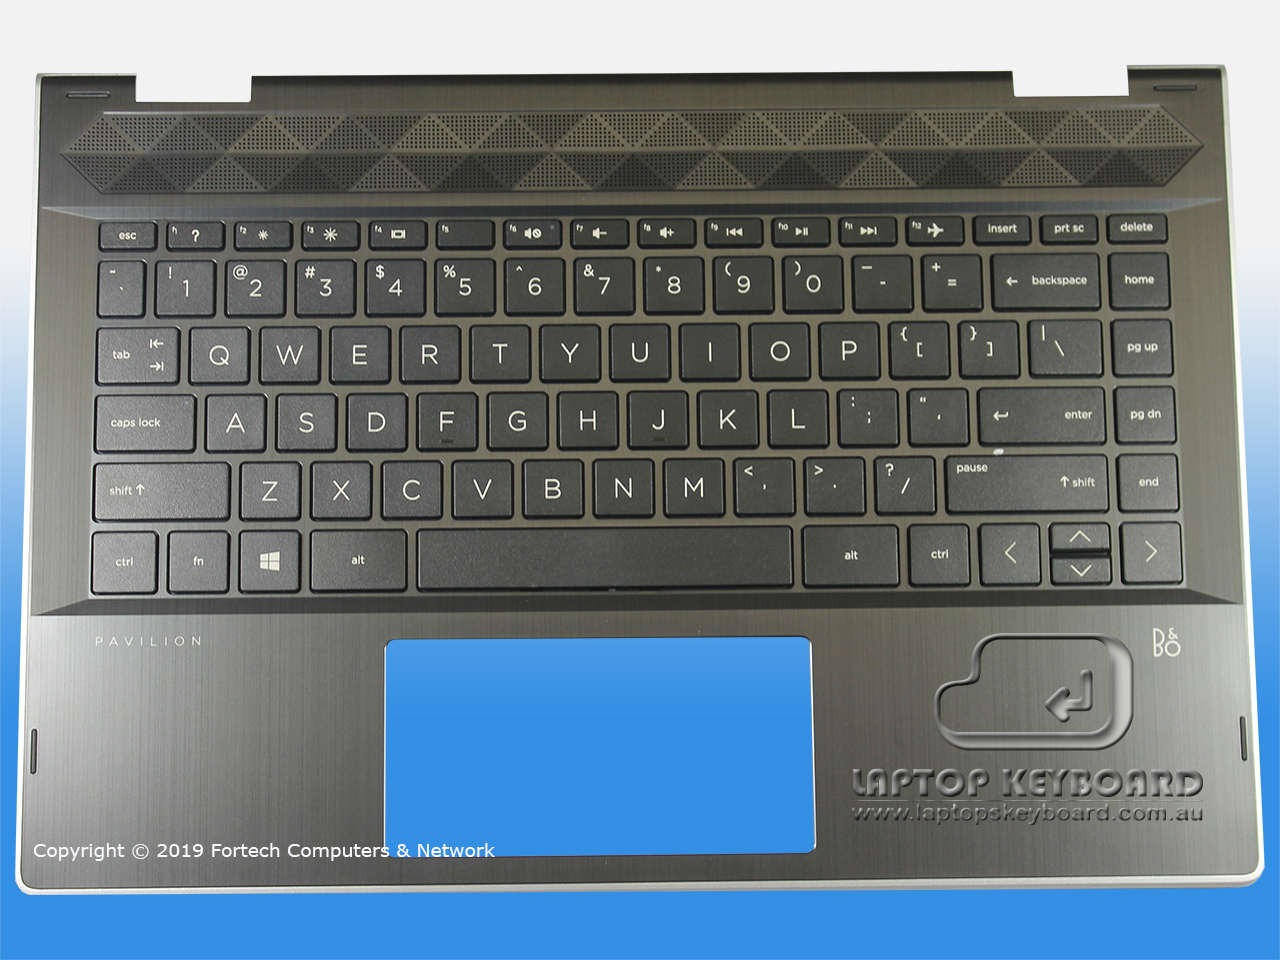 HP PAVILION X360 14-CD0000 TOPCOVER WITH KEYBOARD L18947-001 - Click Image to Close